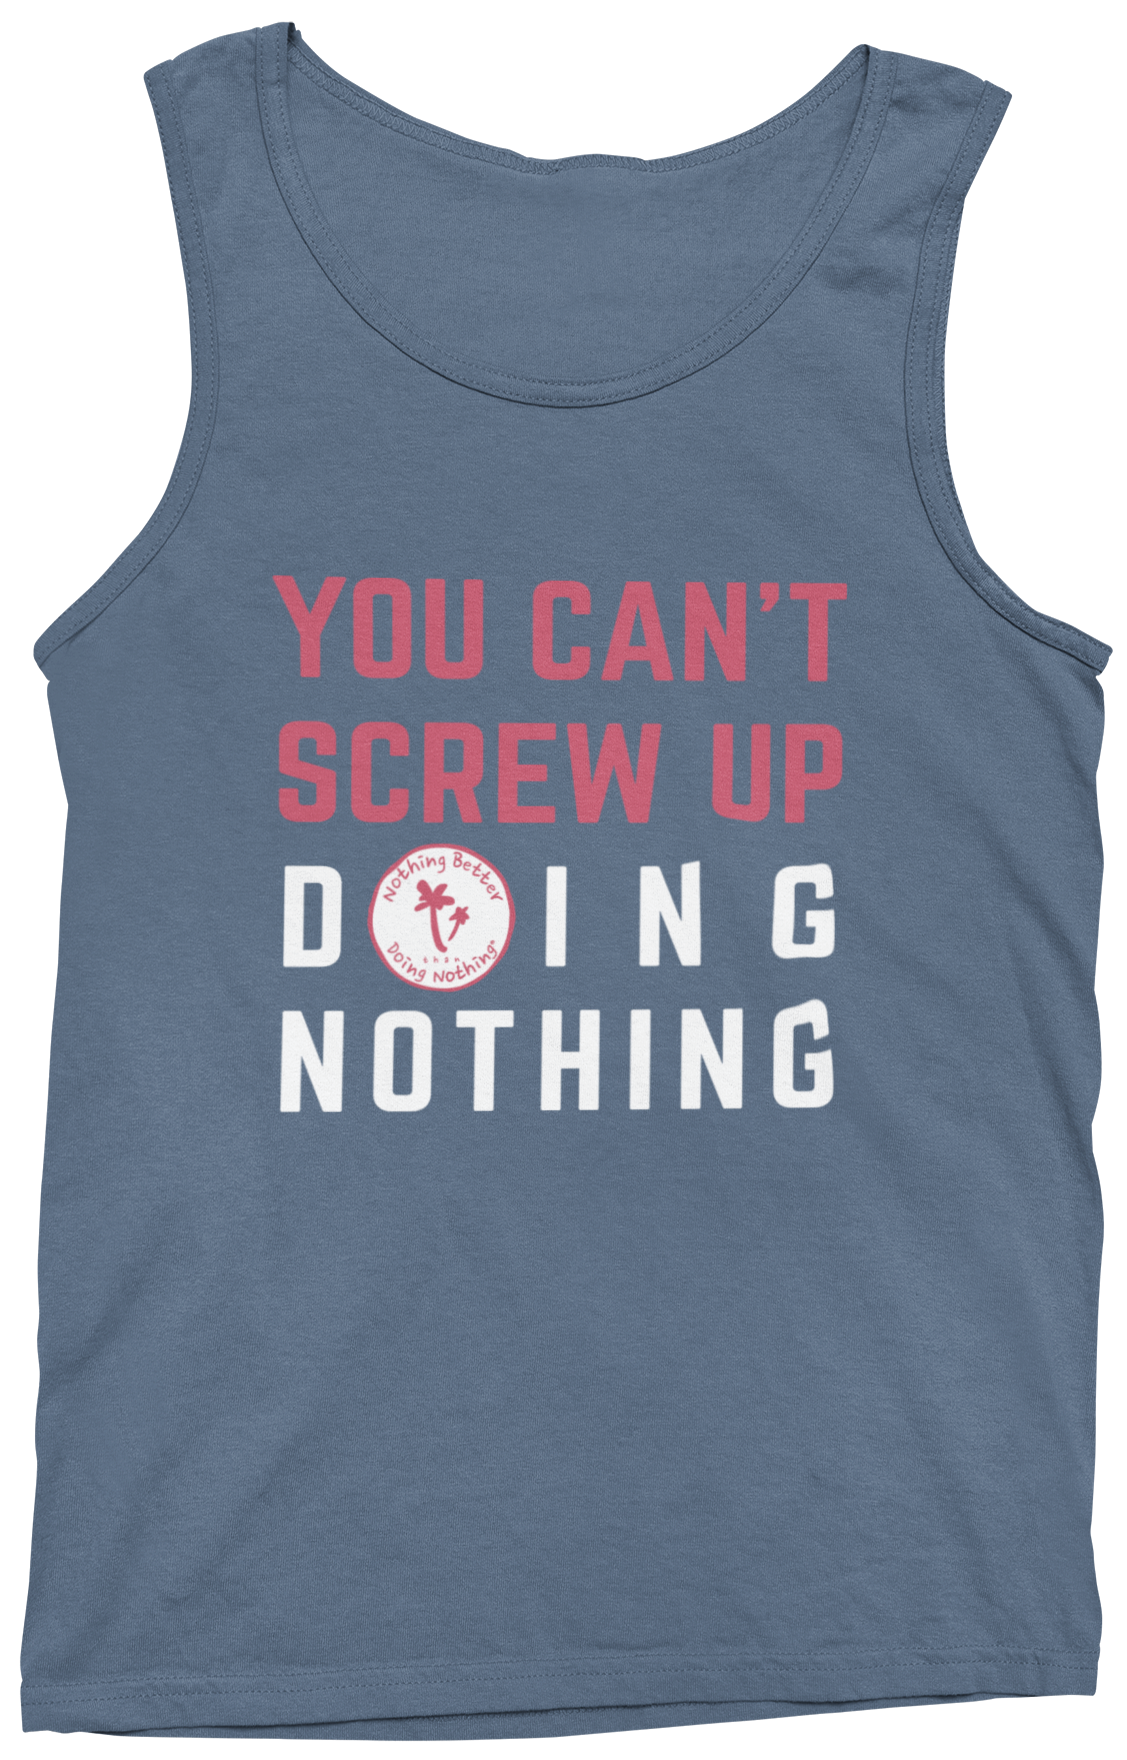 You Can't Screw Up Doing Nothing Tank Top